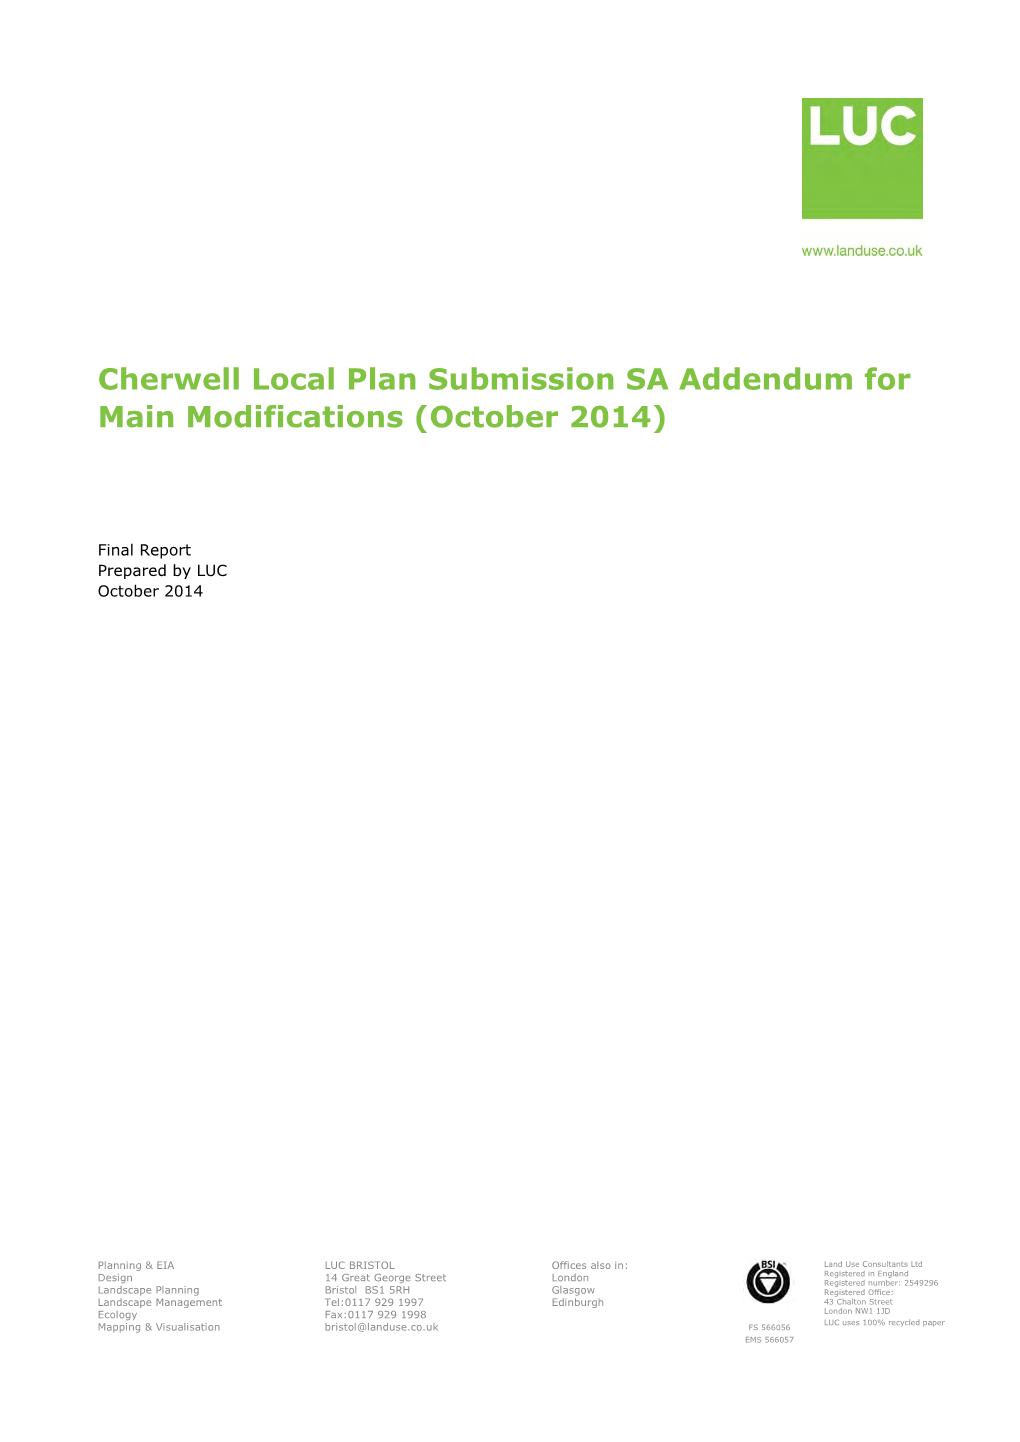 Submission Sustainability Appraisal Addendum for Main Modifications